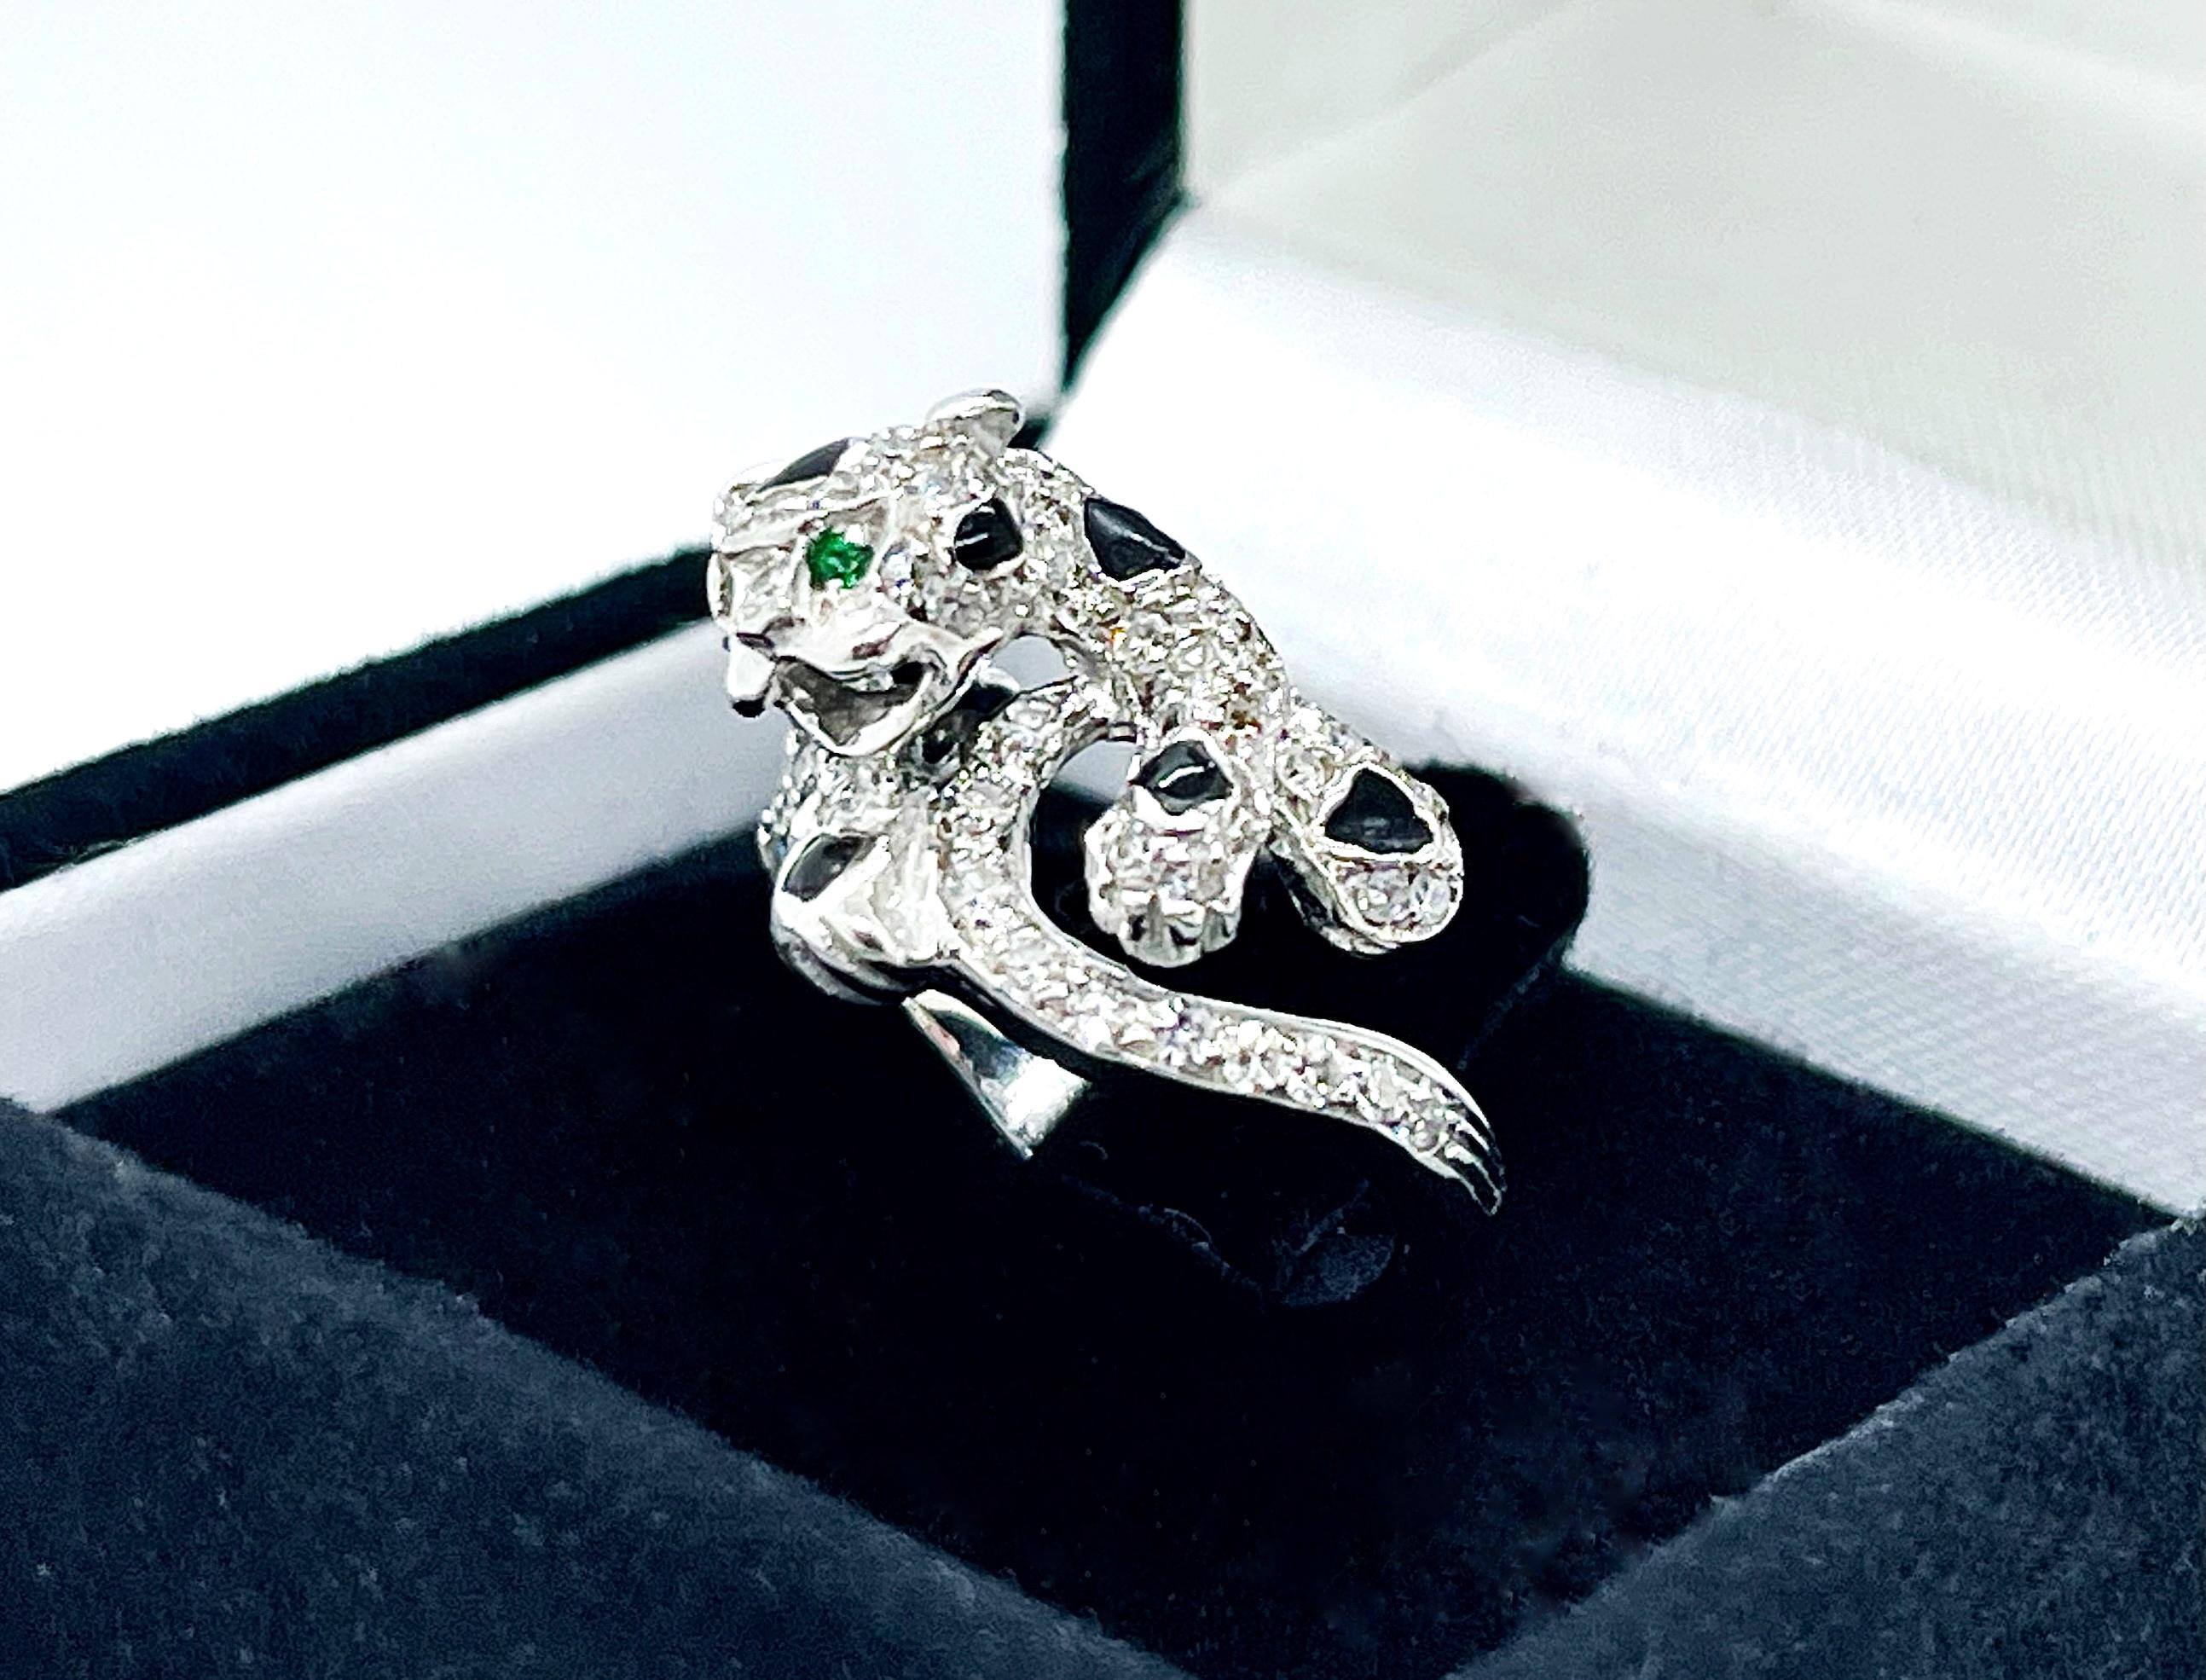 An extraordinary gorgeous cocktail ring, inspired by the famous Cartier Panther ring. The ring is paved with diamonds, onyx and emeralds. It represents a panther which surrounds your finger and ready to jump.  A custom made ring, created by the